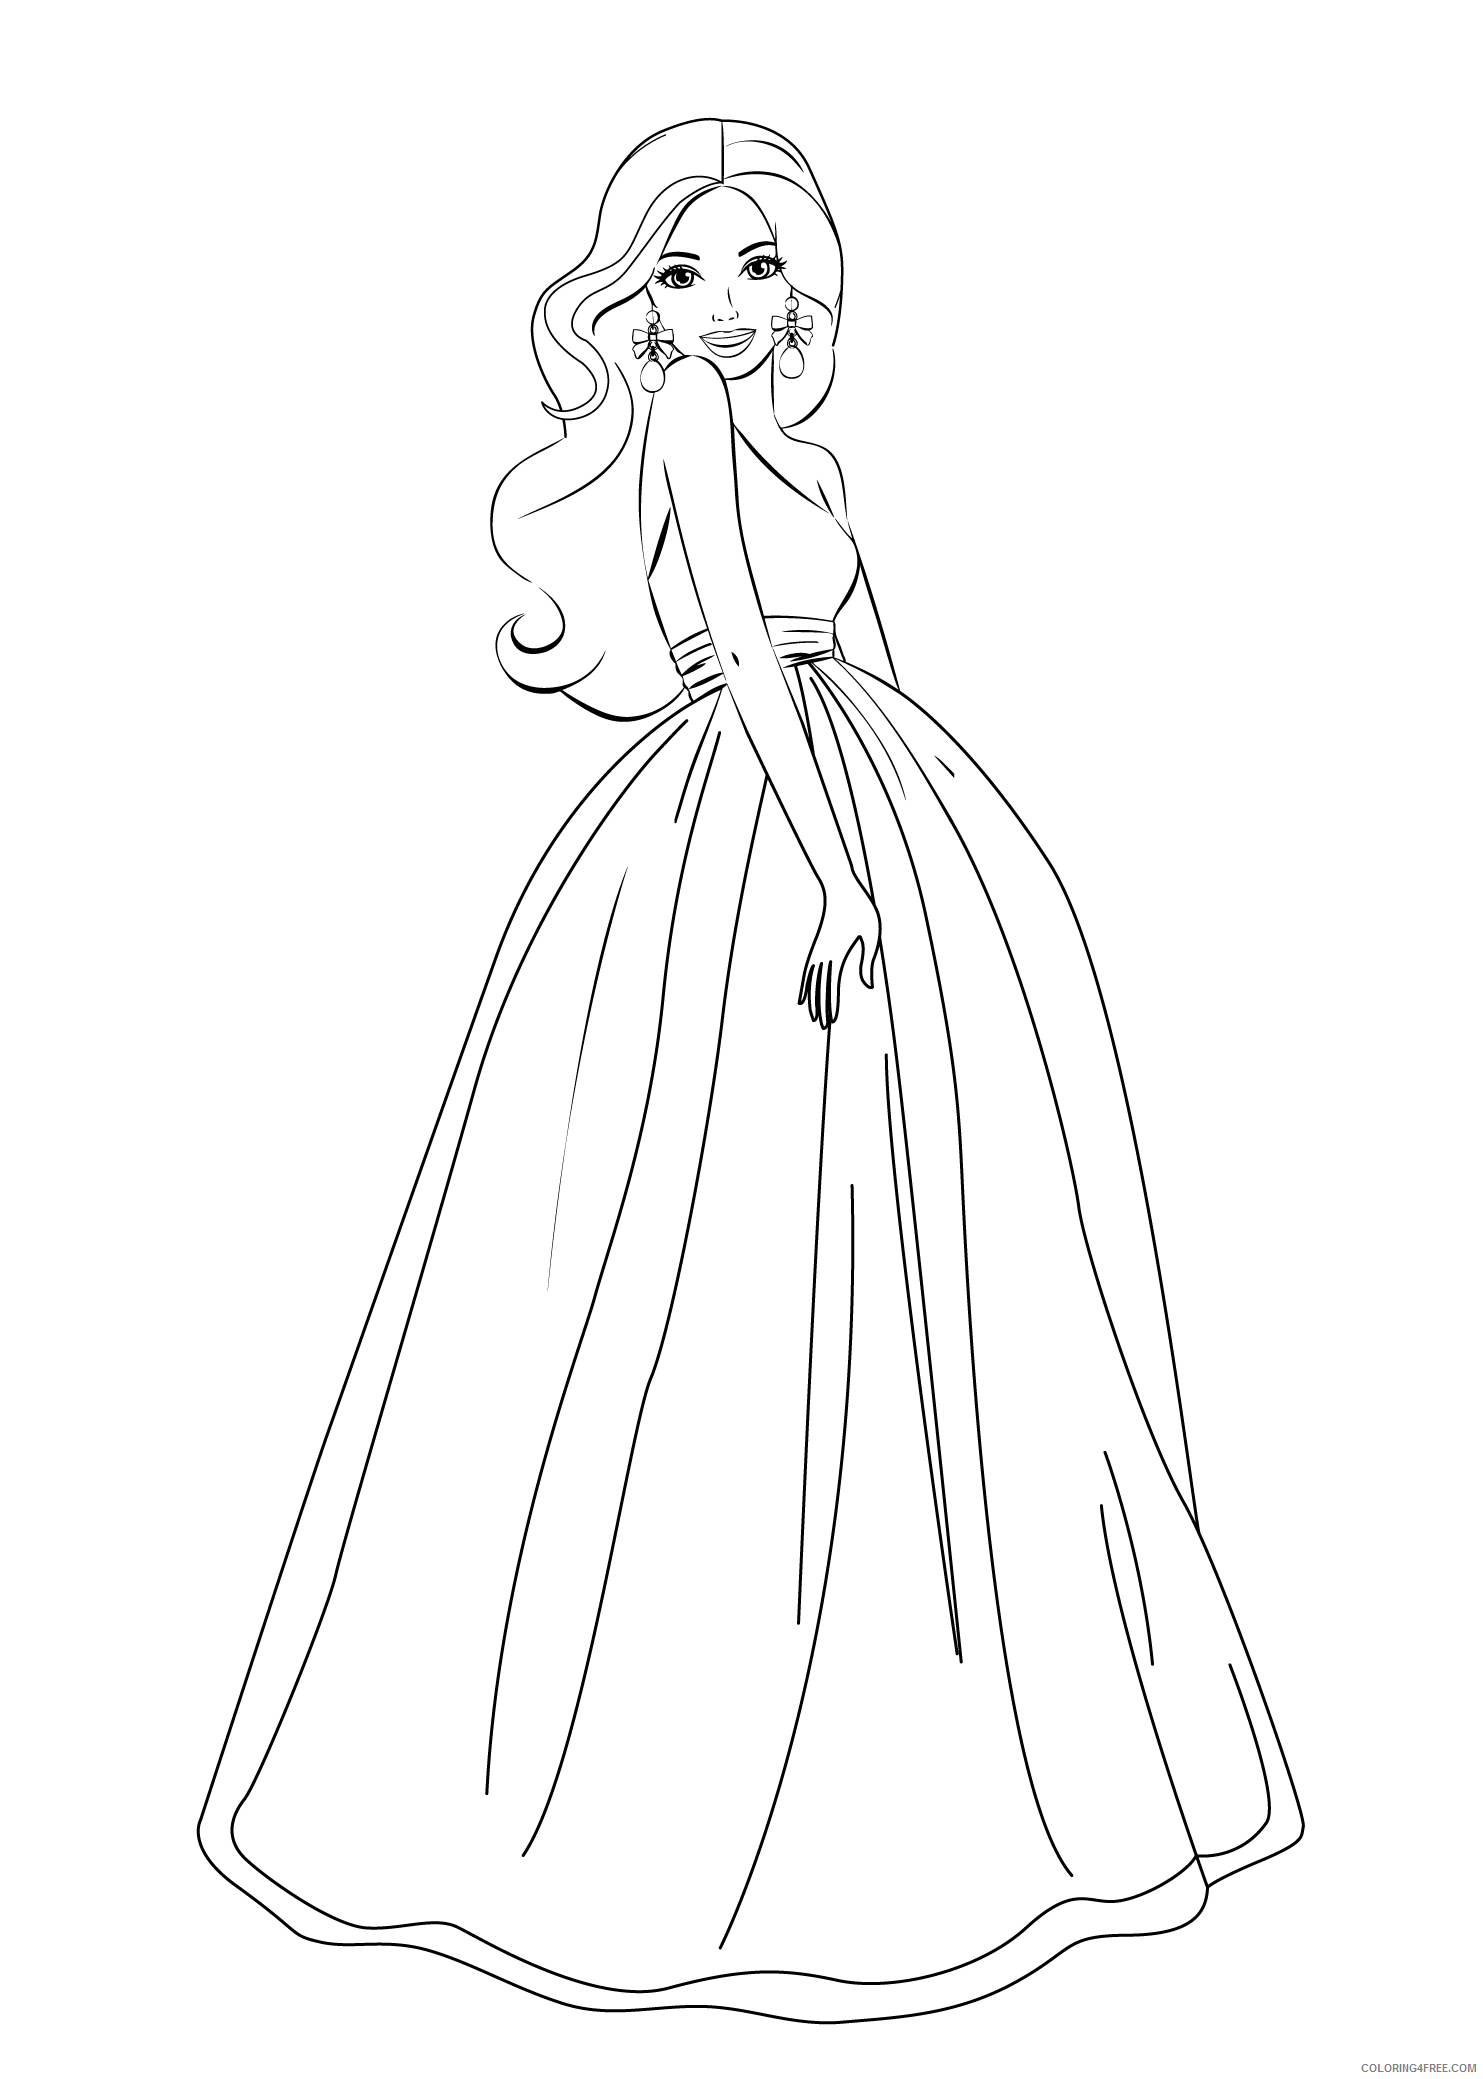 Barbie Coloring Pages Barbie for Girls Printable 2021 0556 Coloring4free